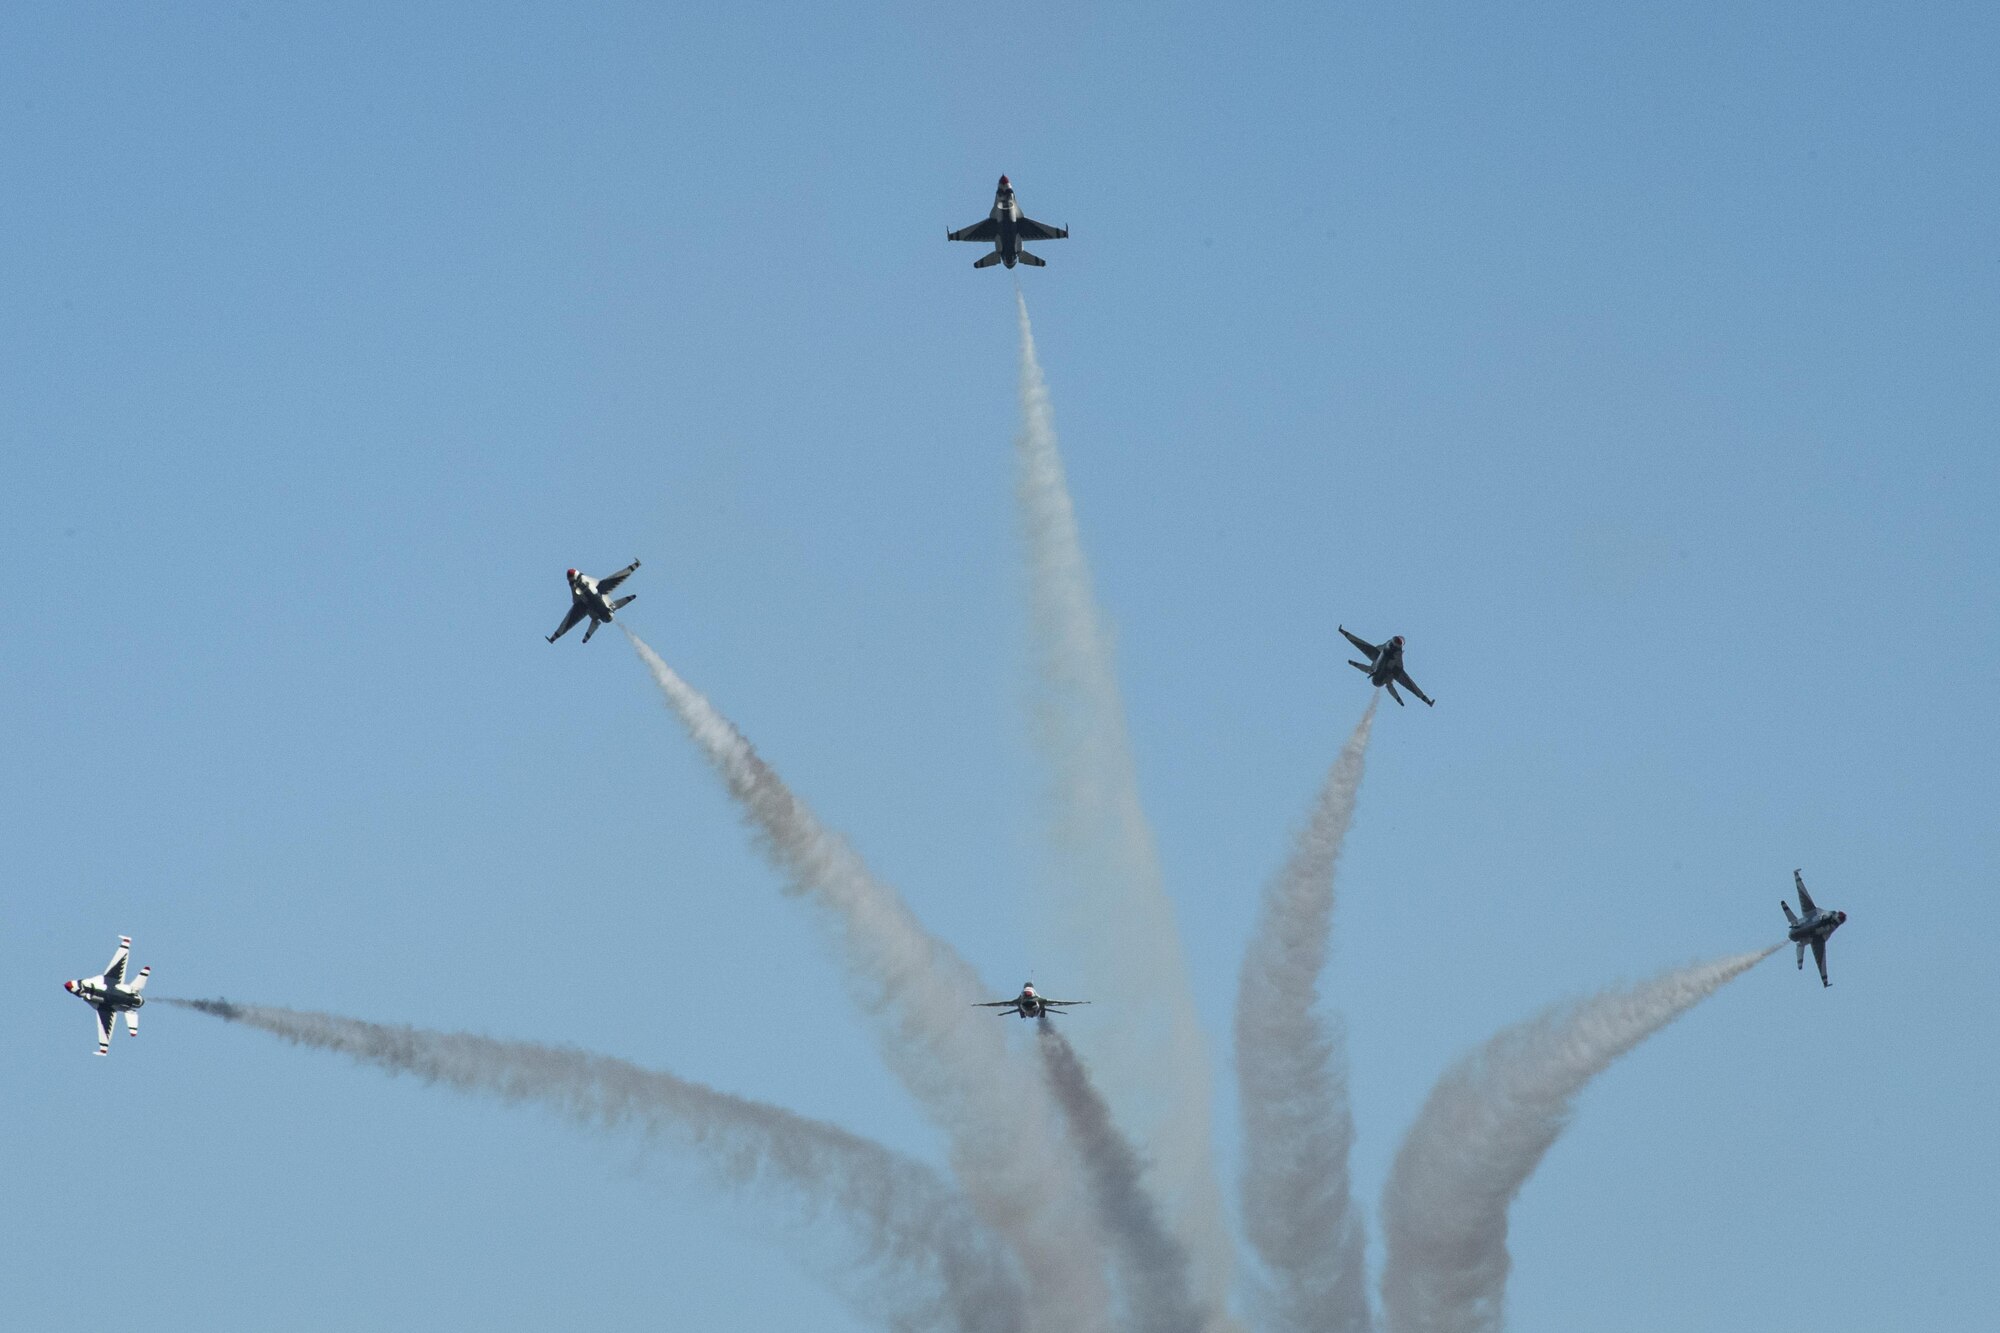 The U.S. Air Force Thunderbirds Flight Demonstration Team soars above Moody Air Force Base during the Thunder Over South Georgia Air Show, Oct. 29, 2017. The Thunderbirds, based out of Nellis Air Force Base, Nev., are the Air Force’s premier aerial demonstration team, performing at air shows and special events worldwide. (Senior Airman Janiqua Robinson)